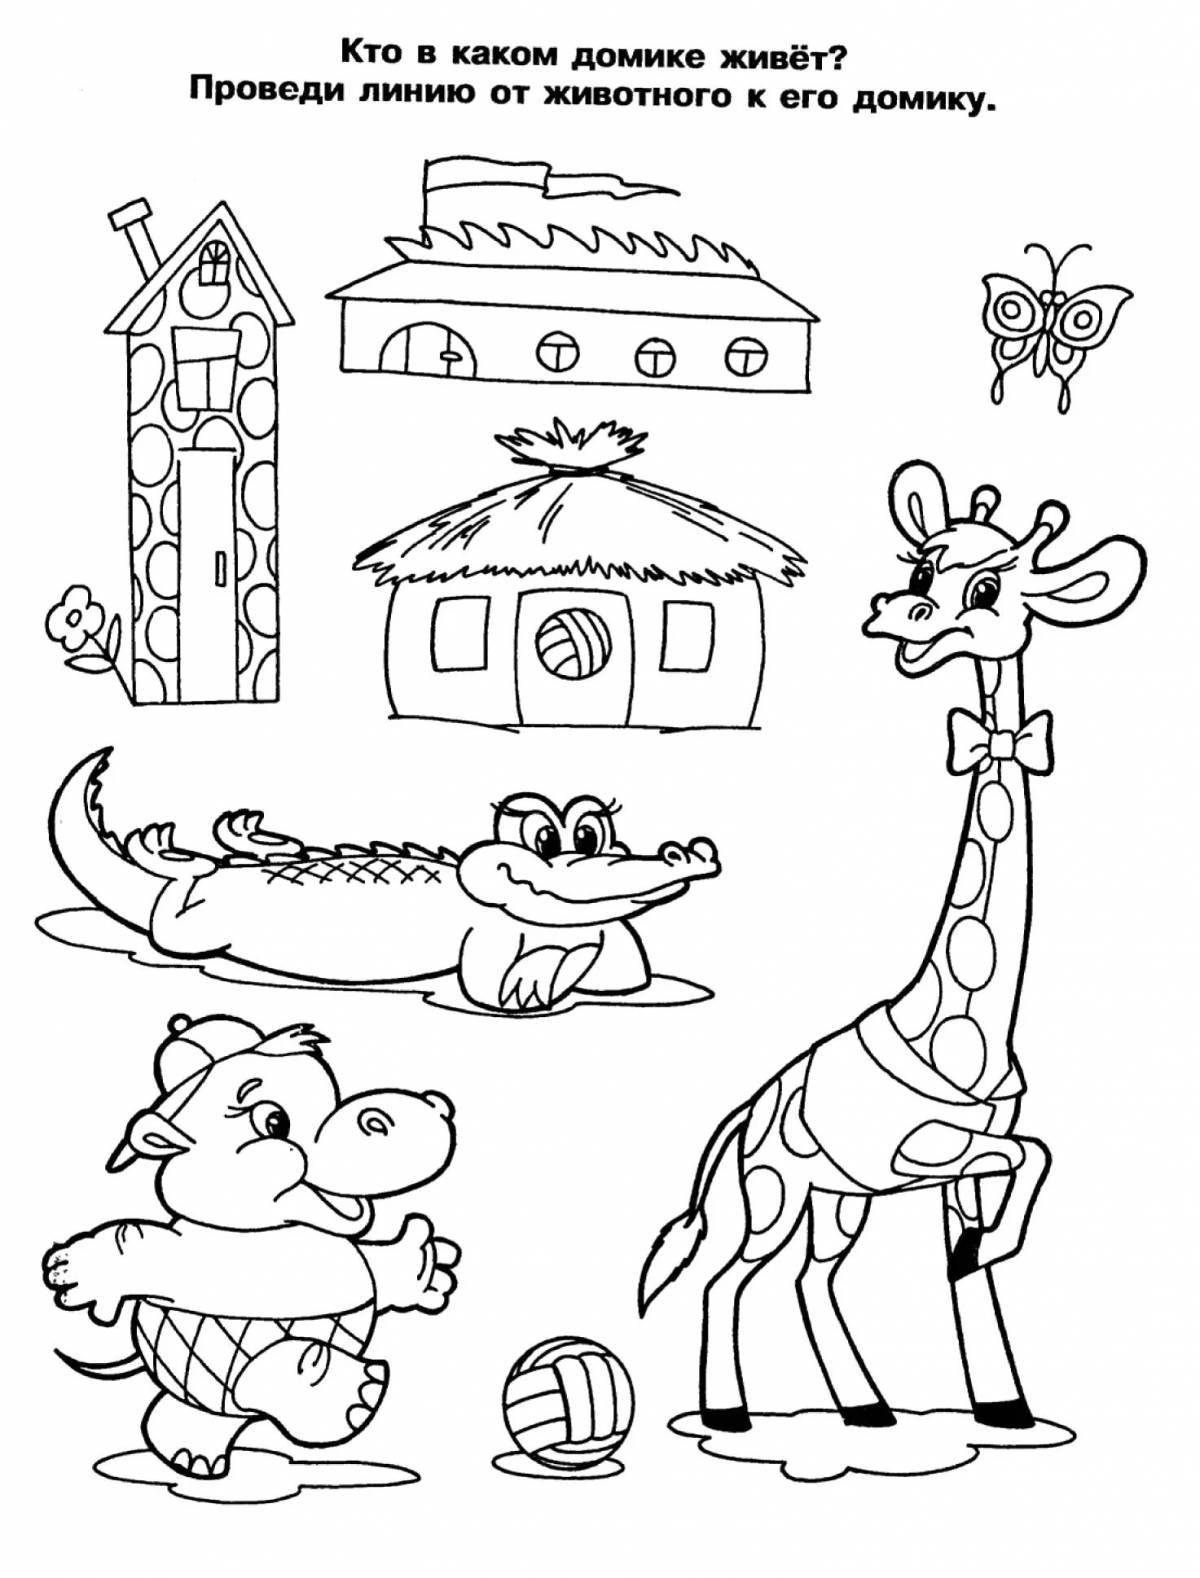 Satisfactory coloring book for 4-5 year olds